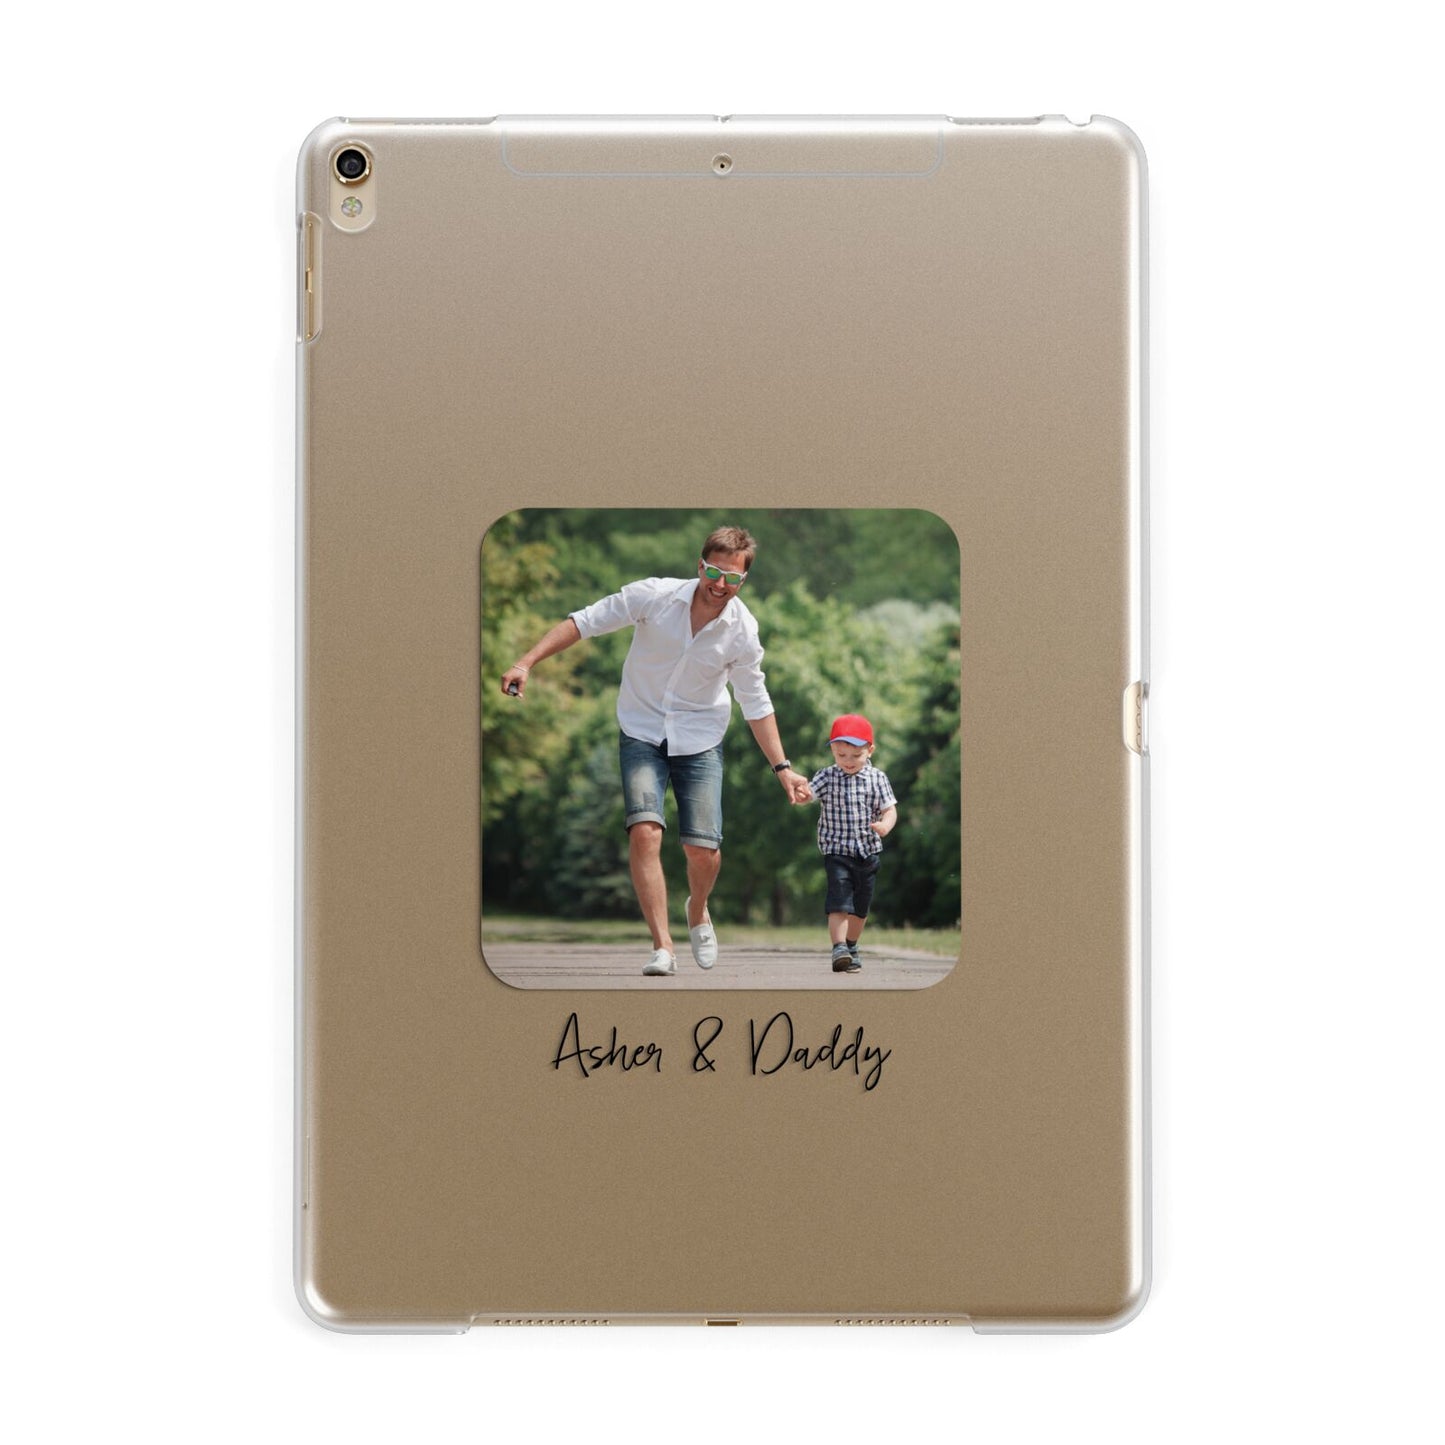 Parent and Child Photo with Text Apple iPad Gold Case